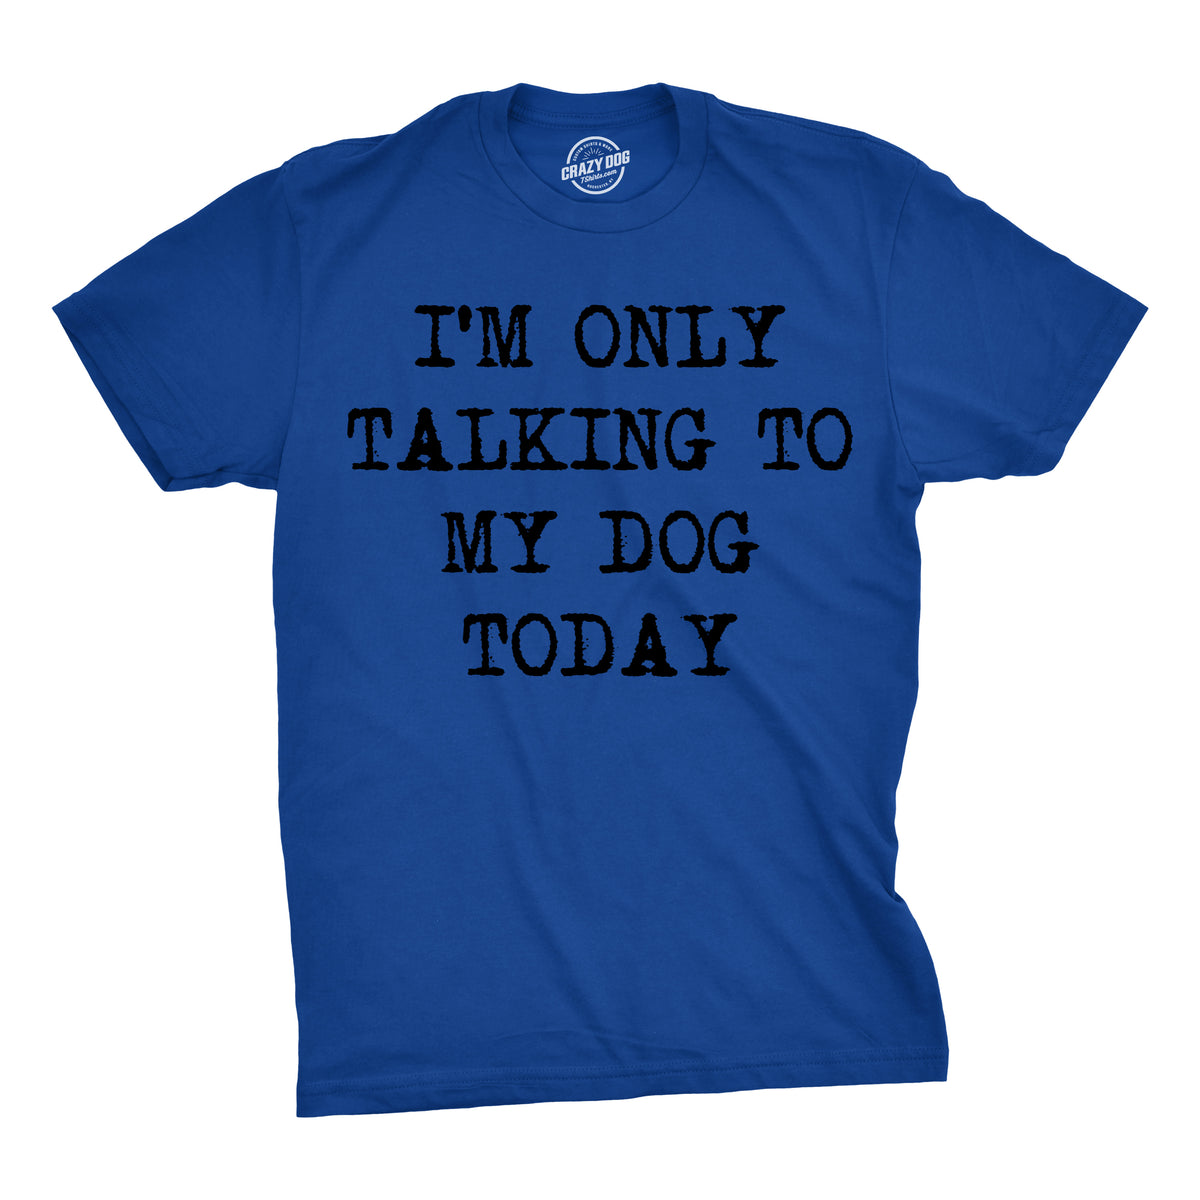 Funny Royal Only Talking To My Dog Today Mens T Shirt Nerdy Dog Introvert Tee